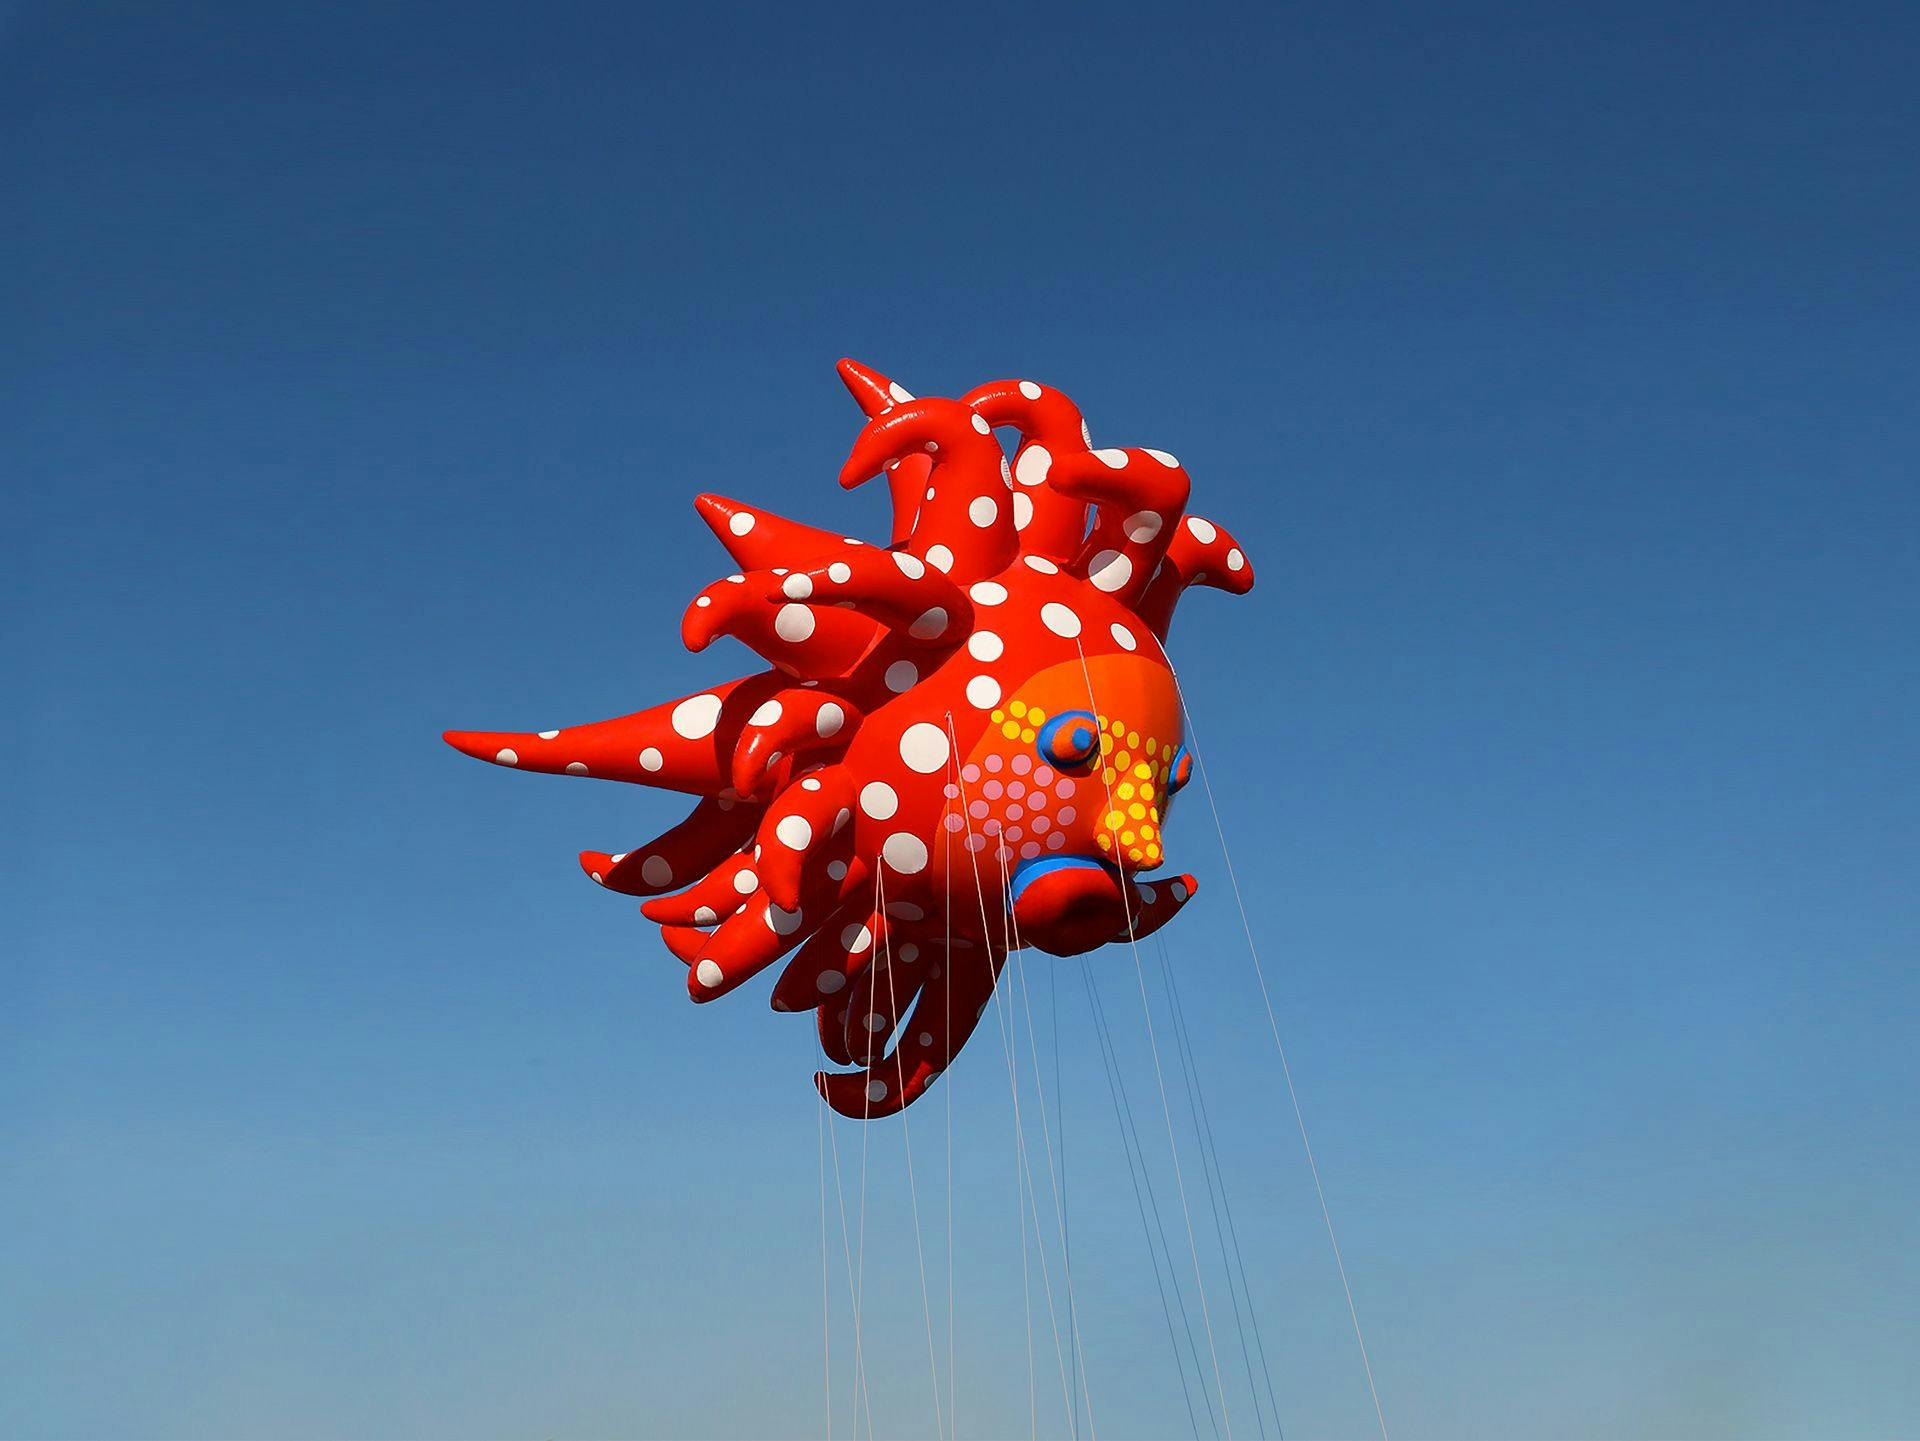 A Macy's Thanksgiving Day Parade balloon by Yayoi Kusama, titled Love Flies Up to the Sky, dated 2020